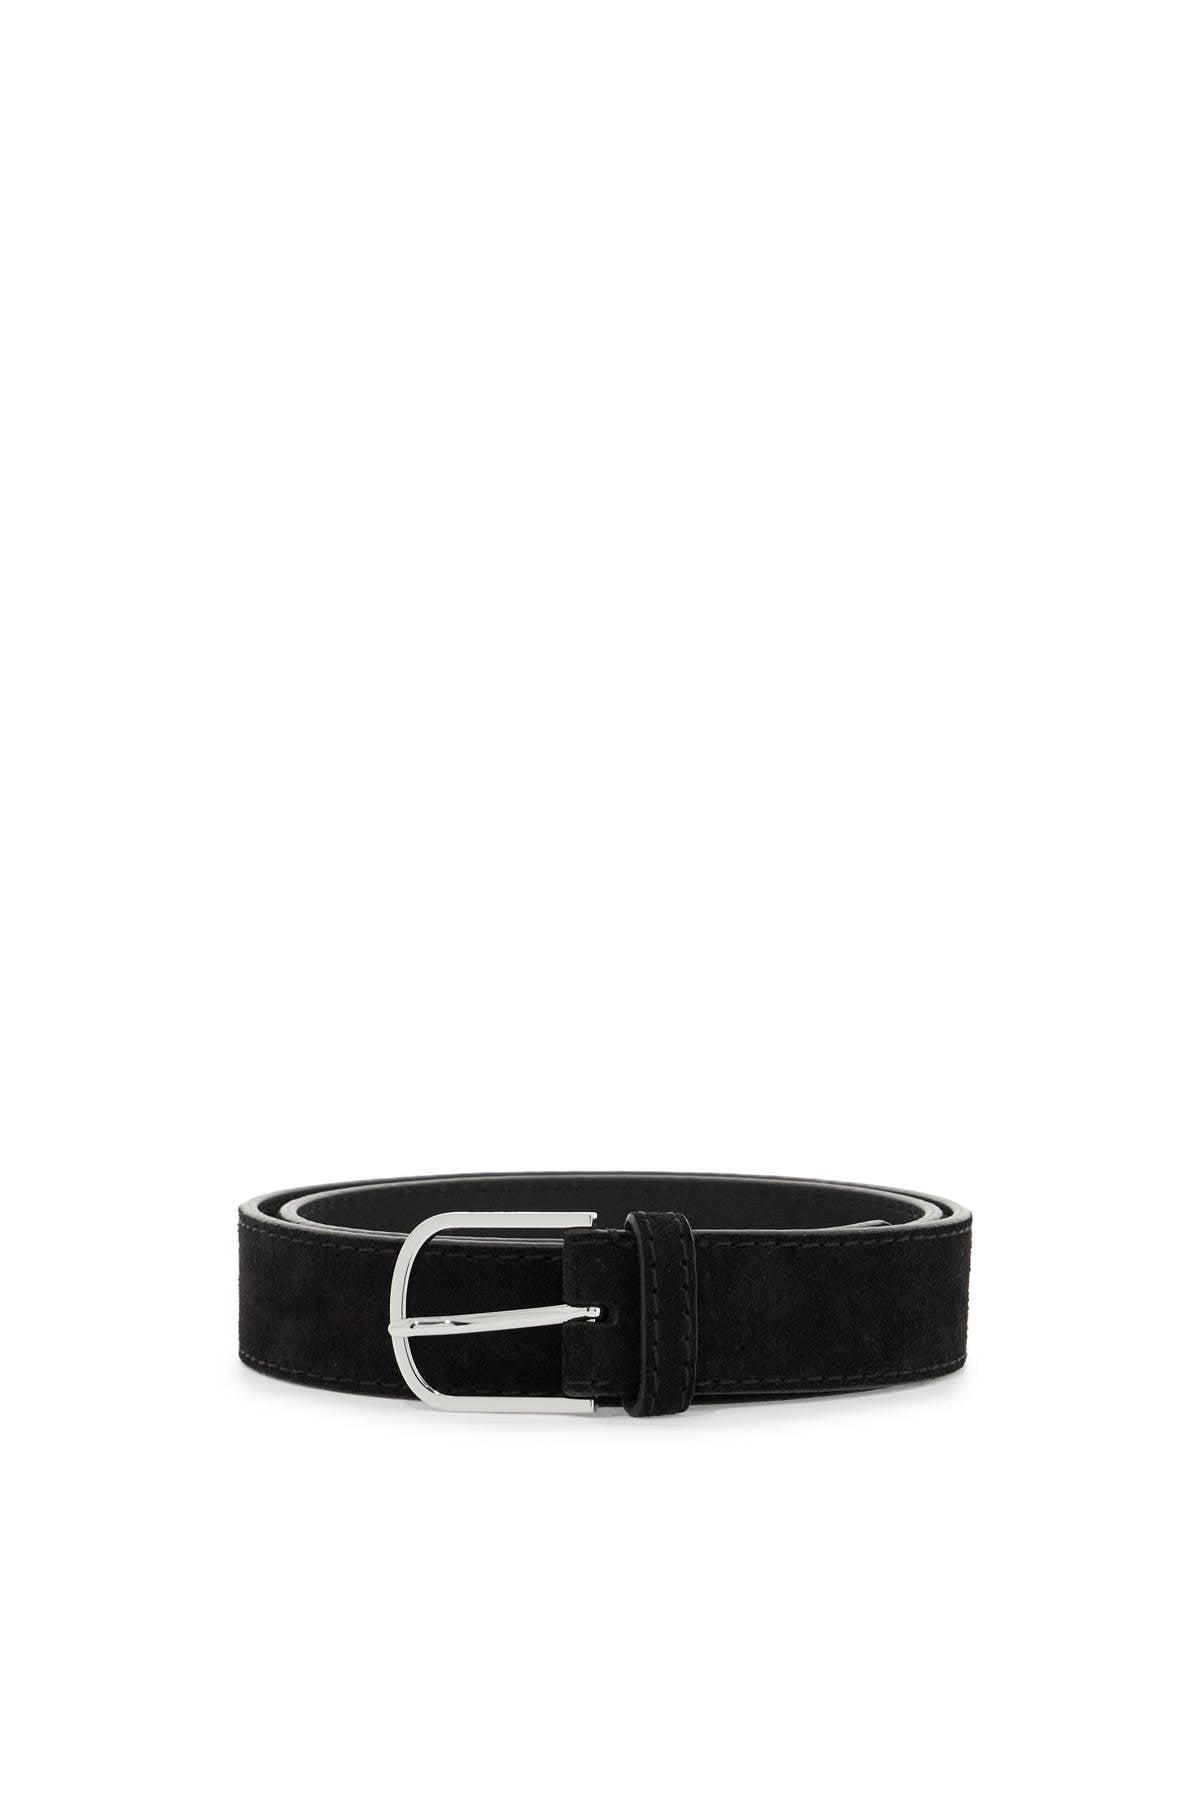 Toteme wide suede leather belt with large buckle